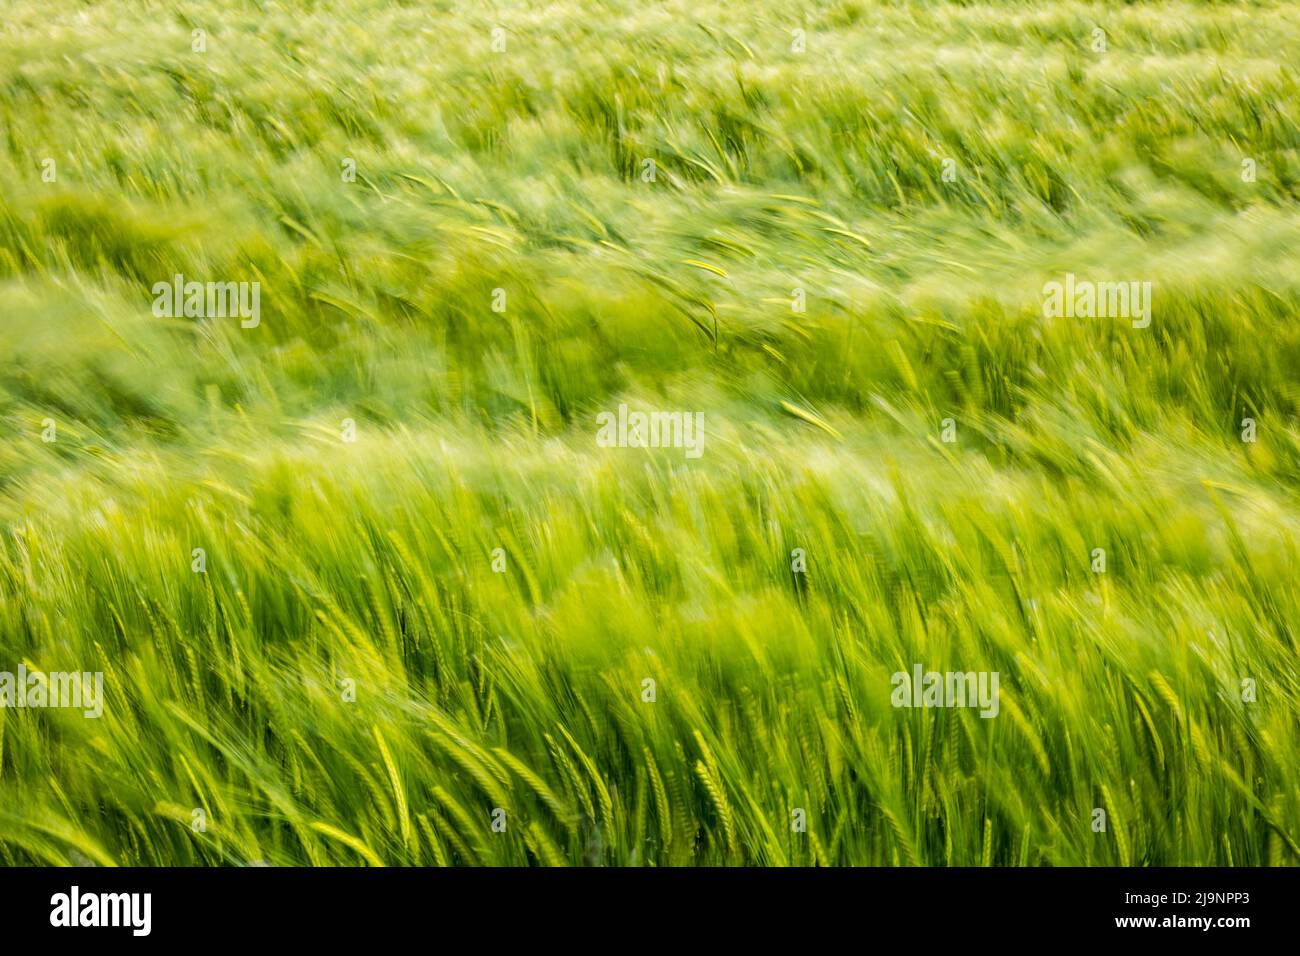 Abstract of a crop field of green barley blowing in the wind on a windy day causing motion blur, Scotland, UK Stock Photo